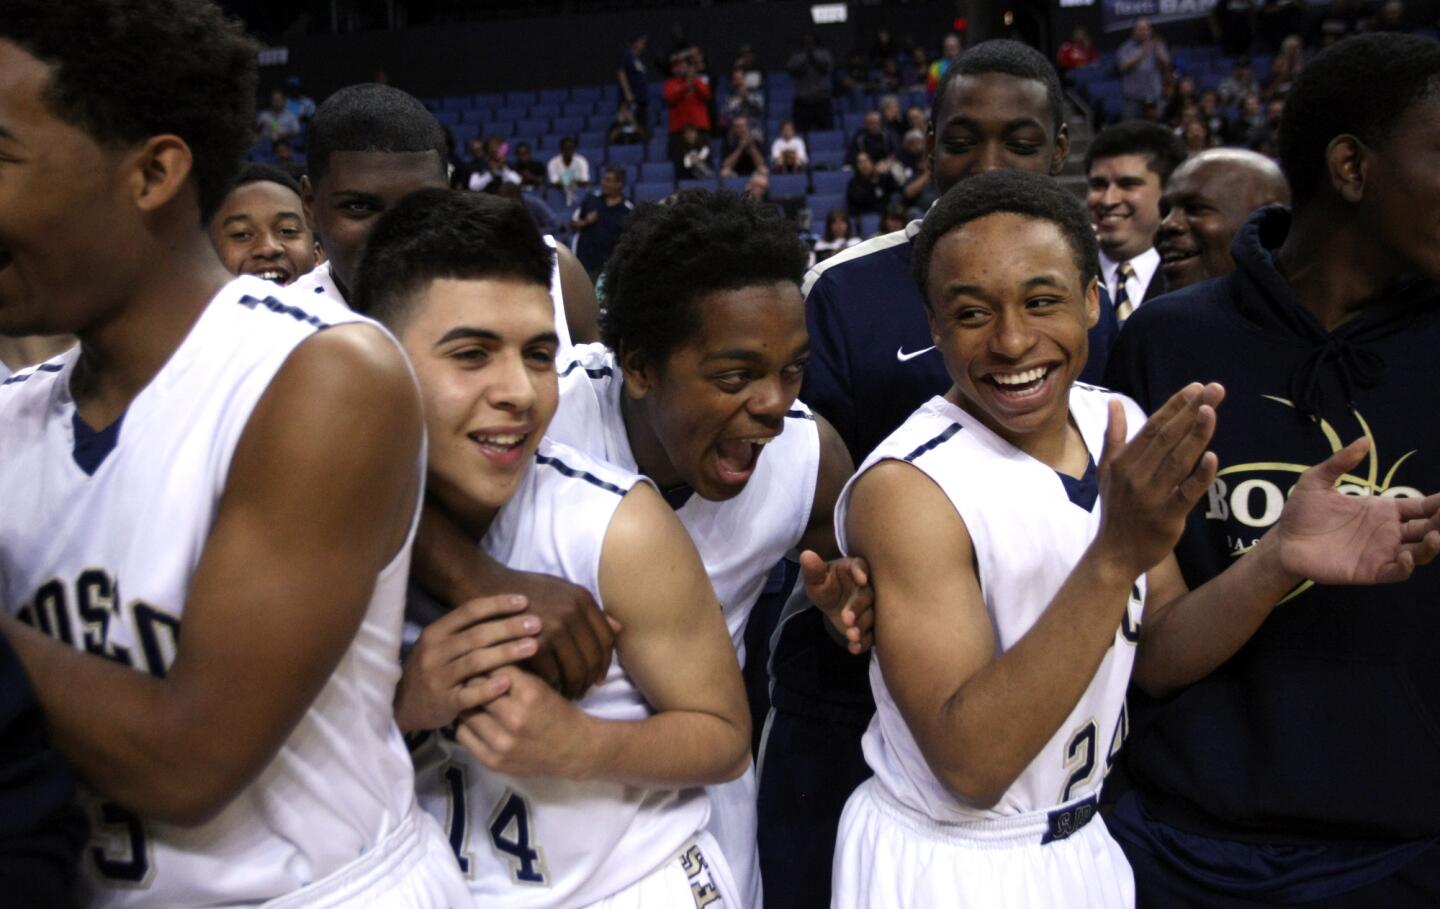 St. John Bosco's Ray Knight Jr., left, Giovanni Fernandez, Abdul Zaid and Isaiah LeBlanc celebrate the Braves' 72-55 win over Compton in the Southern California Regional Division II final Saturday at Citizens Business Bank Arena.